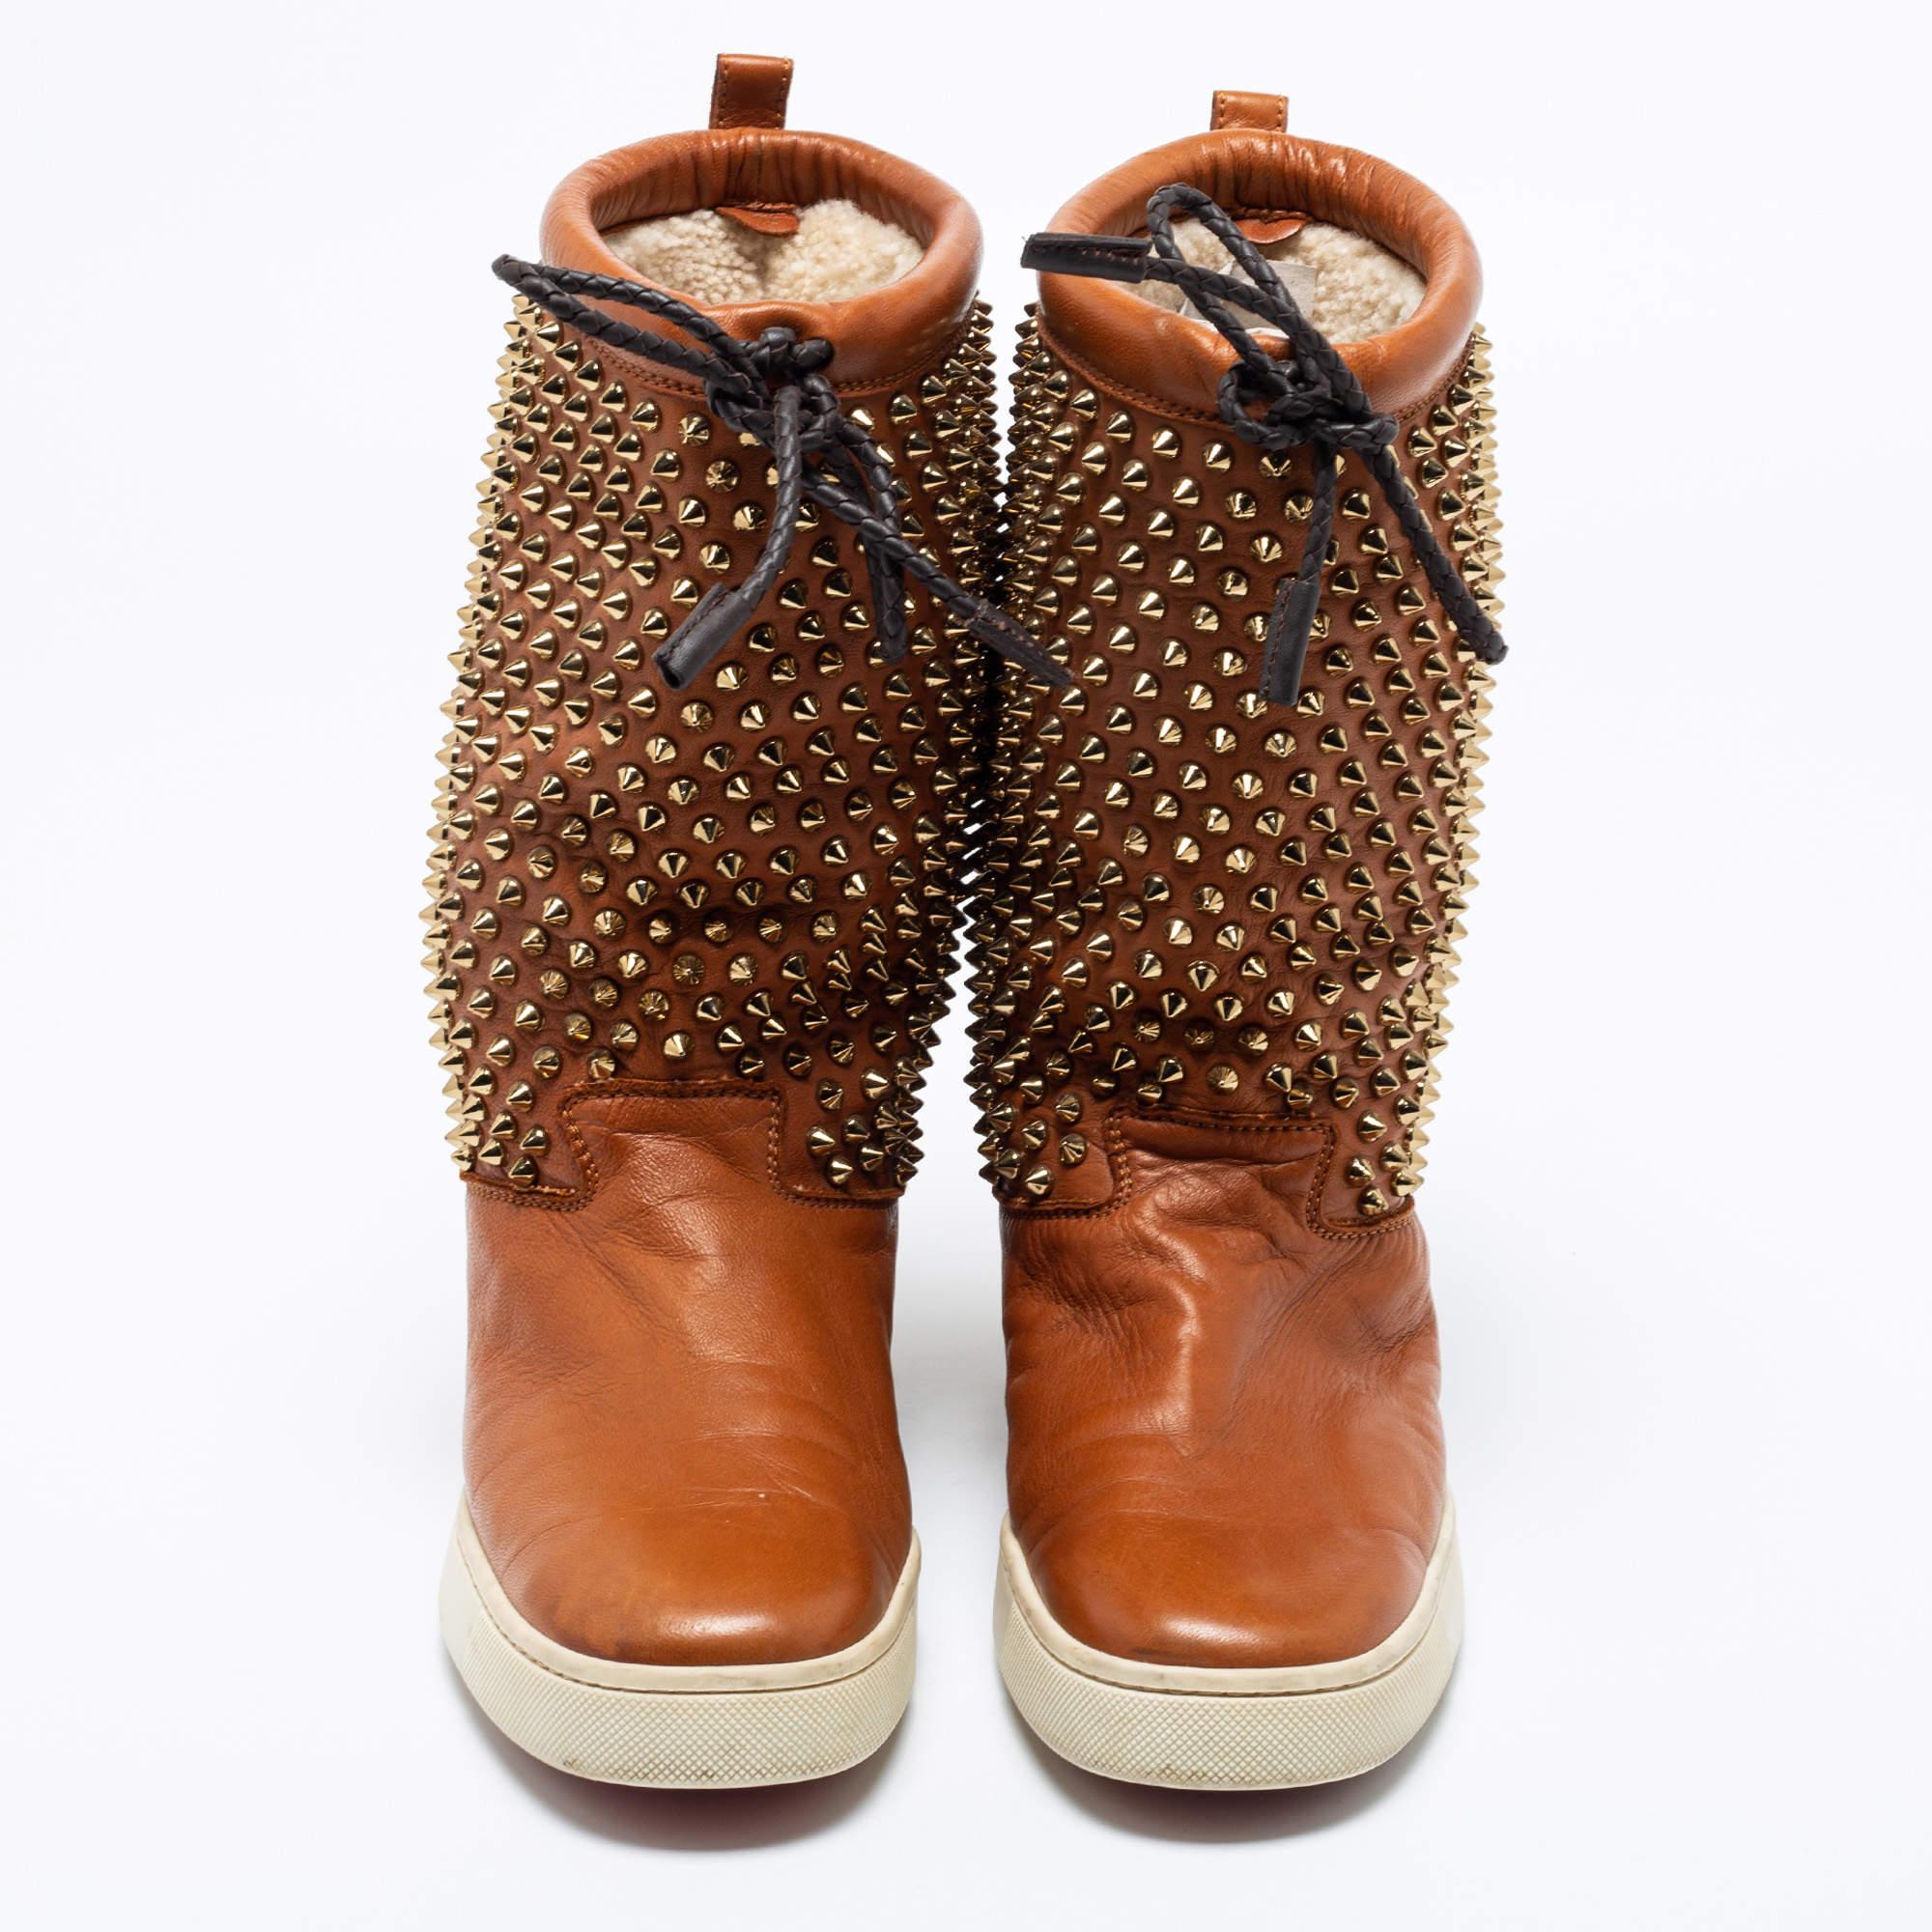 Christian Louboutin Brown Spiked Leather Surlapony Mid Calf Boots Size 38.5 In Good Condition For Sale In Dubai, Al Qouz 2